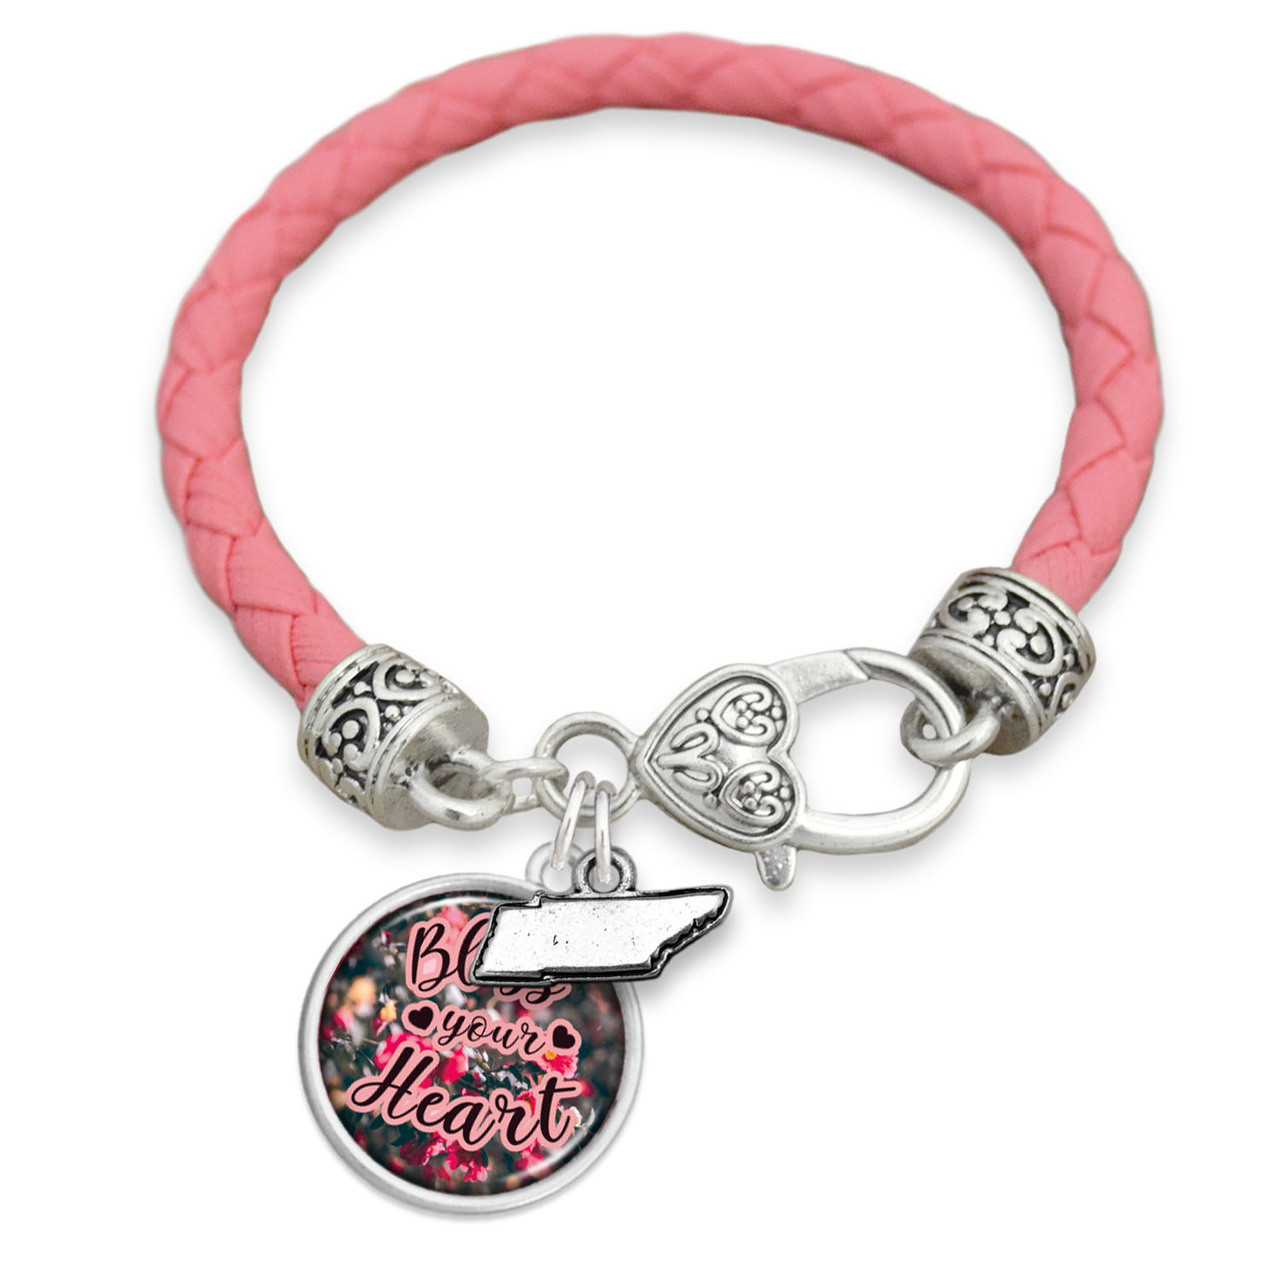 Bless Your Heart Tennessee Leather Bracelet